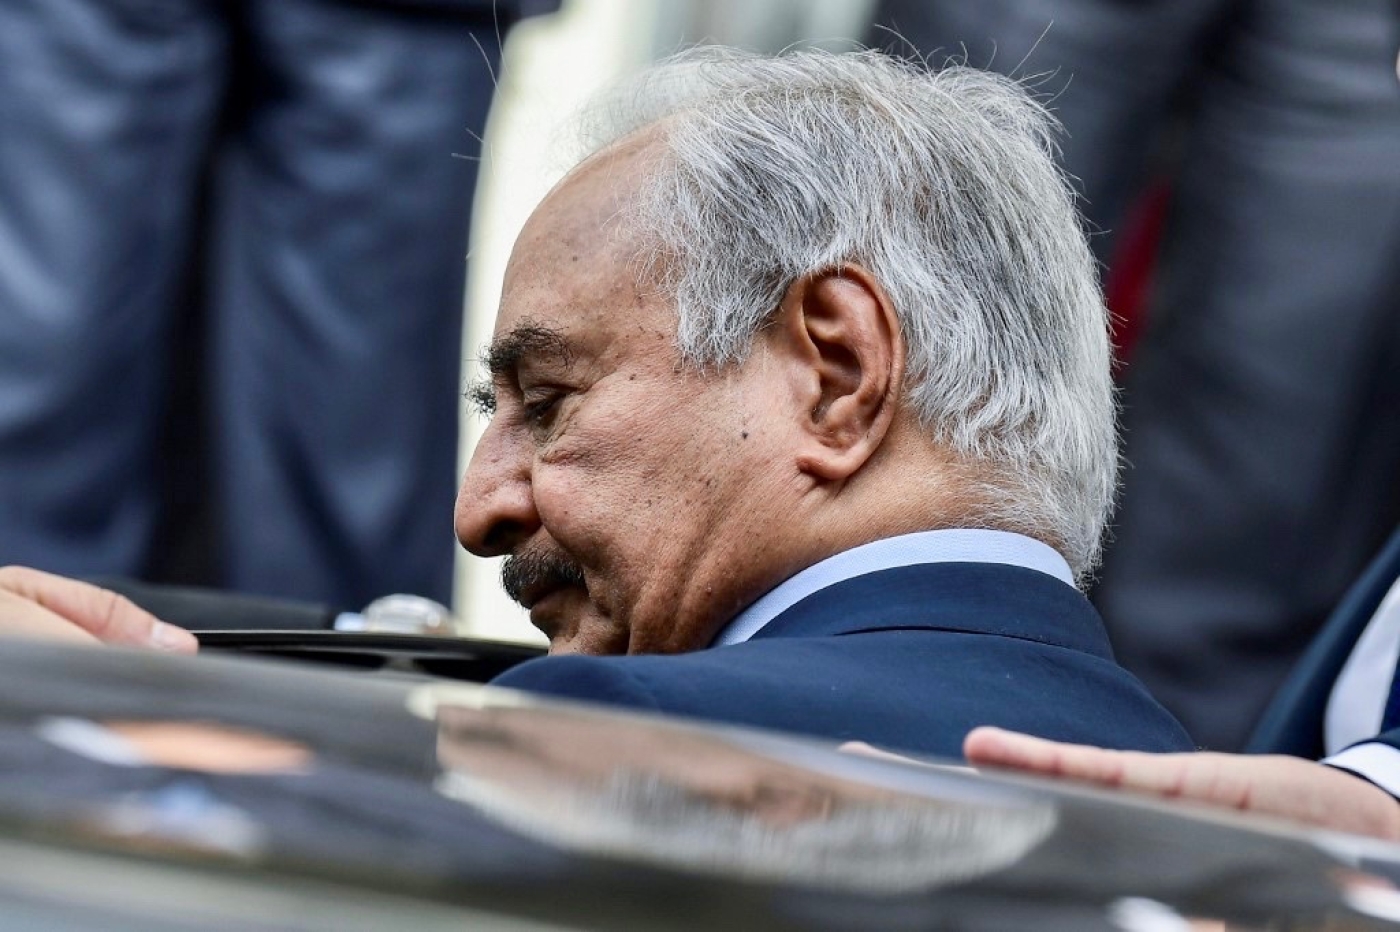 Haftar's legal team claims he immune from prosecution since he should be treated as a head of state.